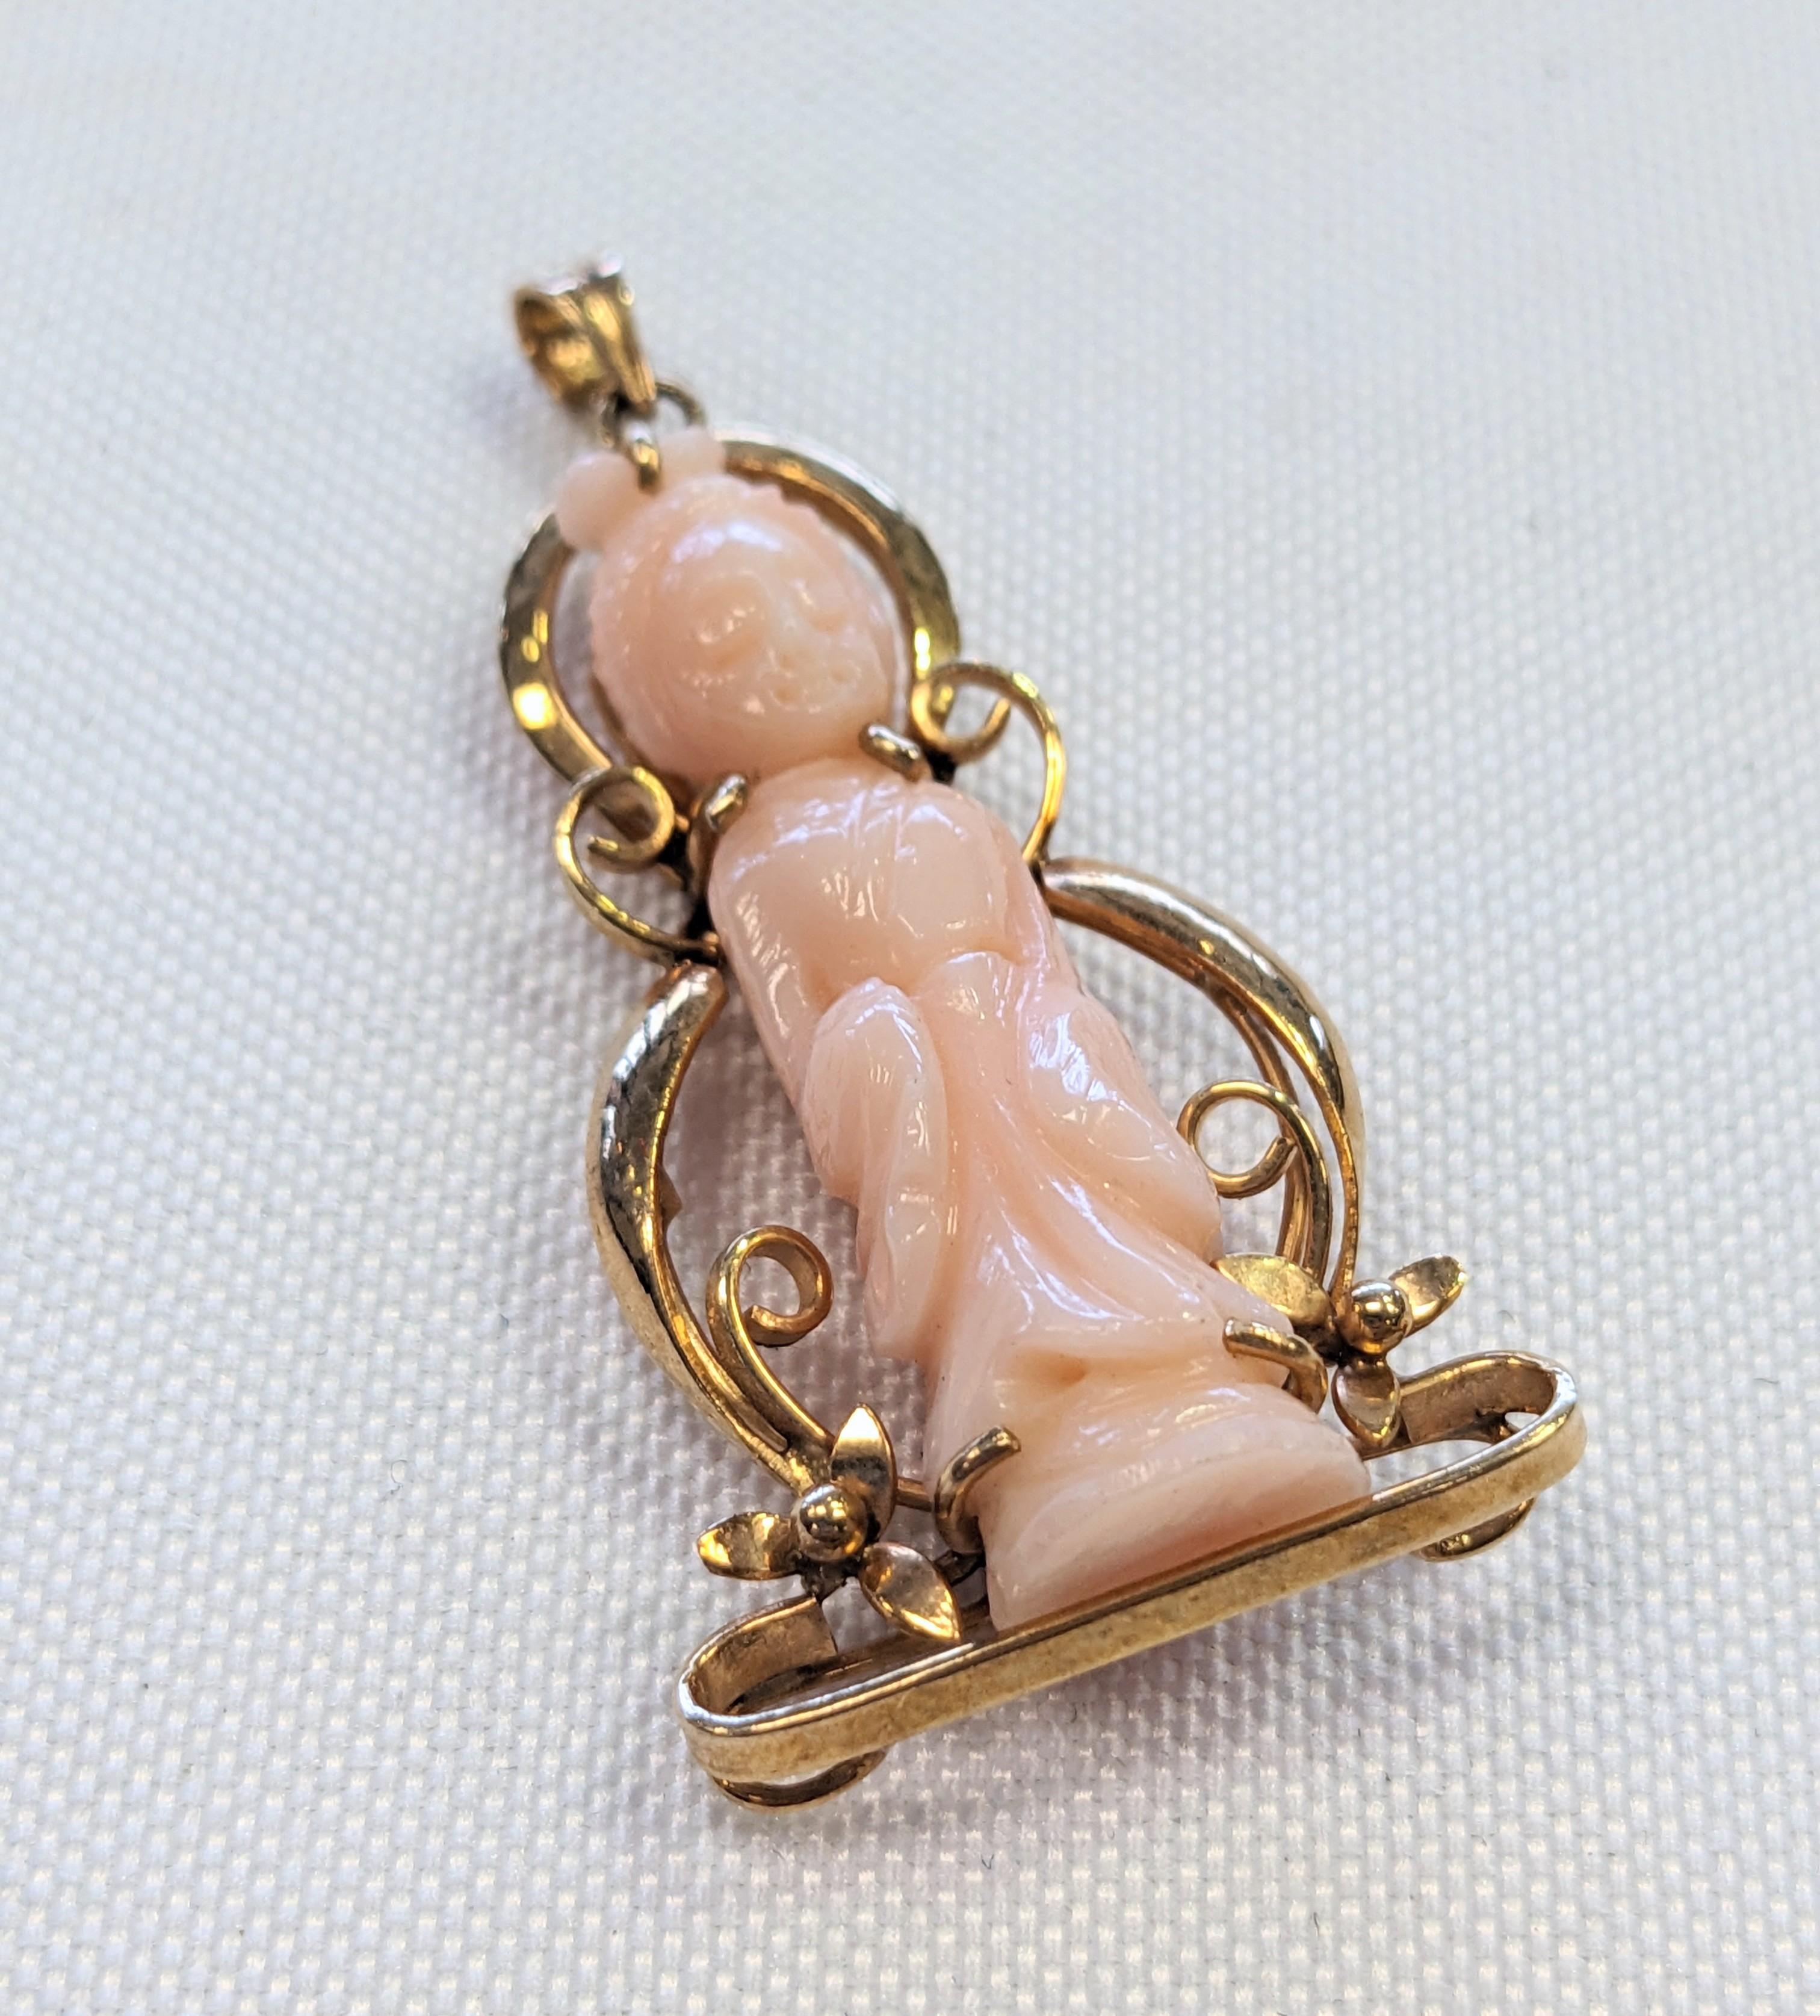 RARE 14K GOLD PENDANT WITH CORAL CARVED OF THE GODDESS GUANYIN 7.1 GRAMS